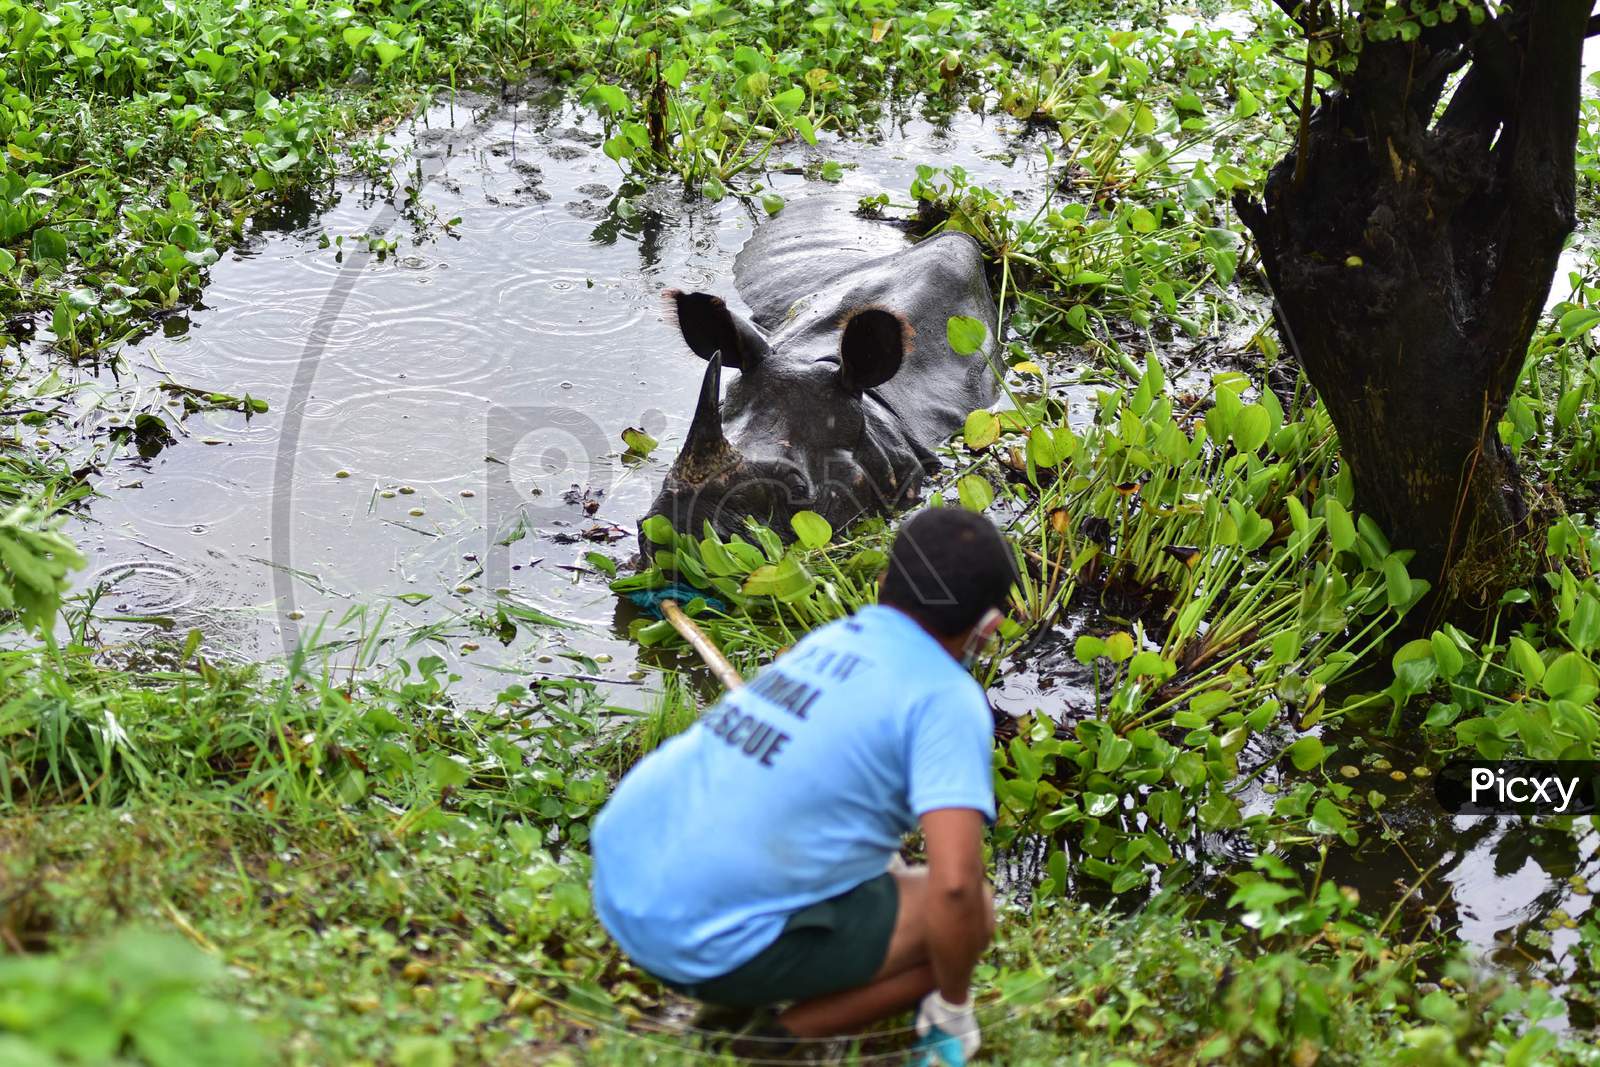 Forest officials try to feed a rhino who is resting near National Highway 37 after it strayed out of the flood-affected Kaziranga National Park in Nagaon, Assam on July 18, 2020